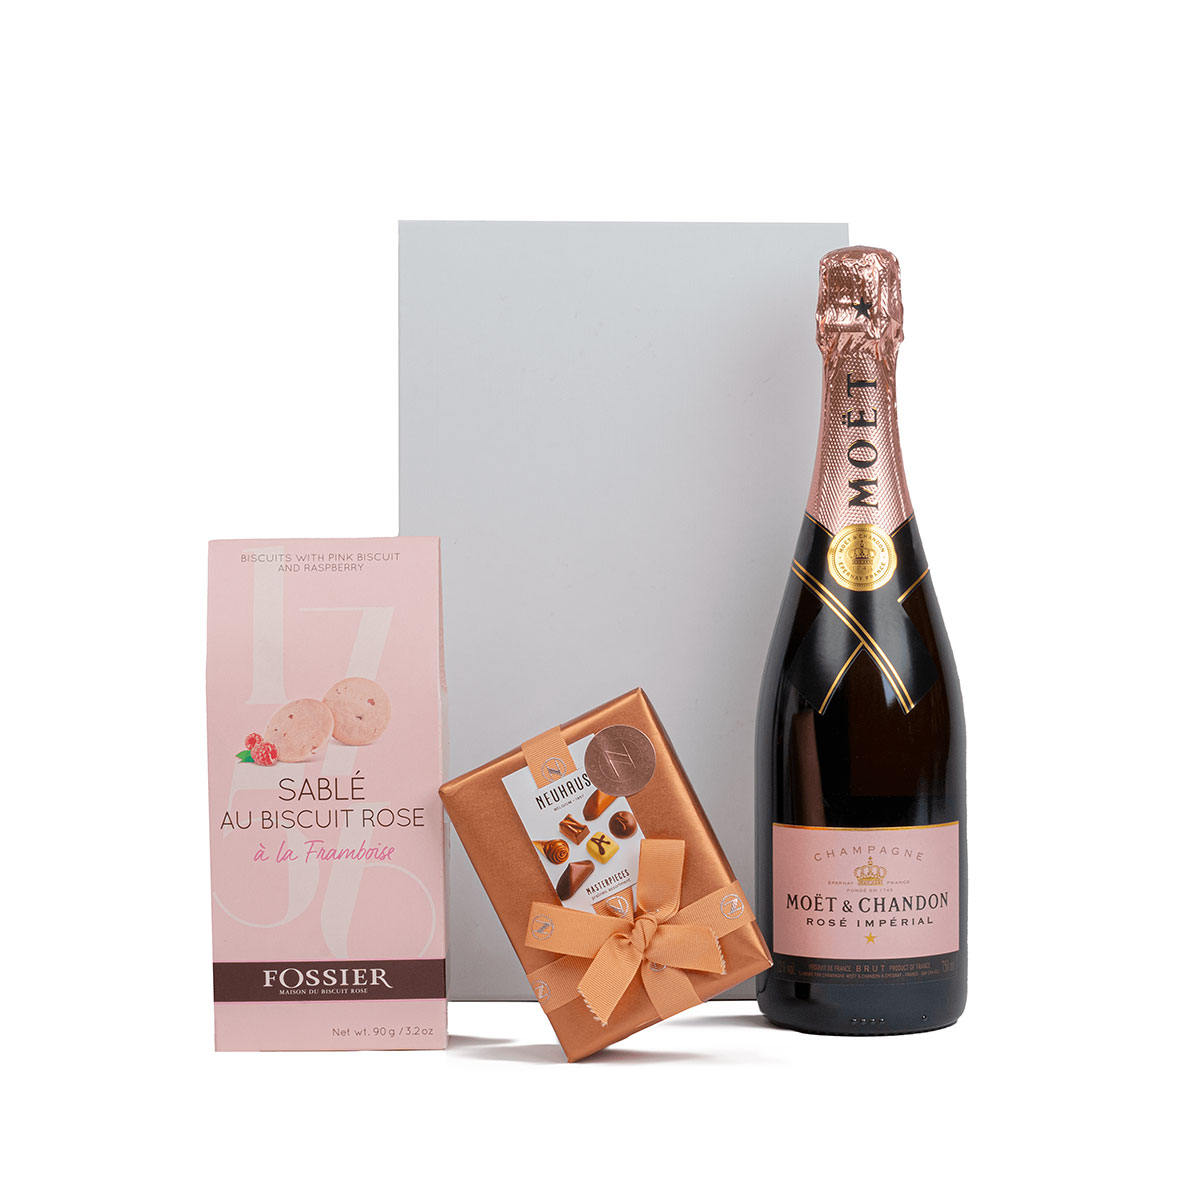 Bottega Prosecco Sparkling Rose Wine Sweets Delivery In Netherlands By Giftsforeurope